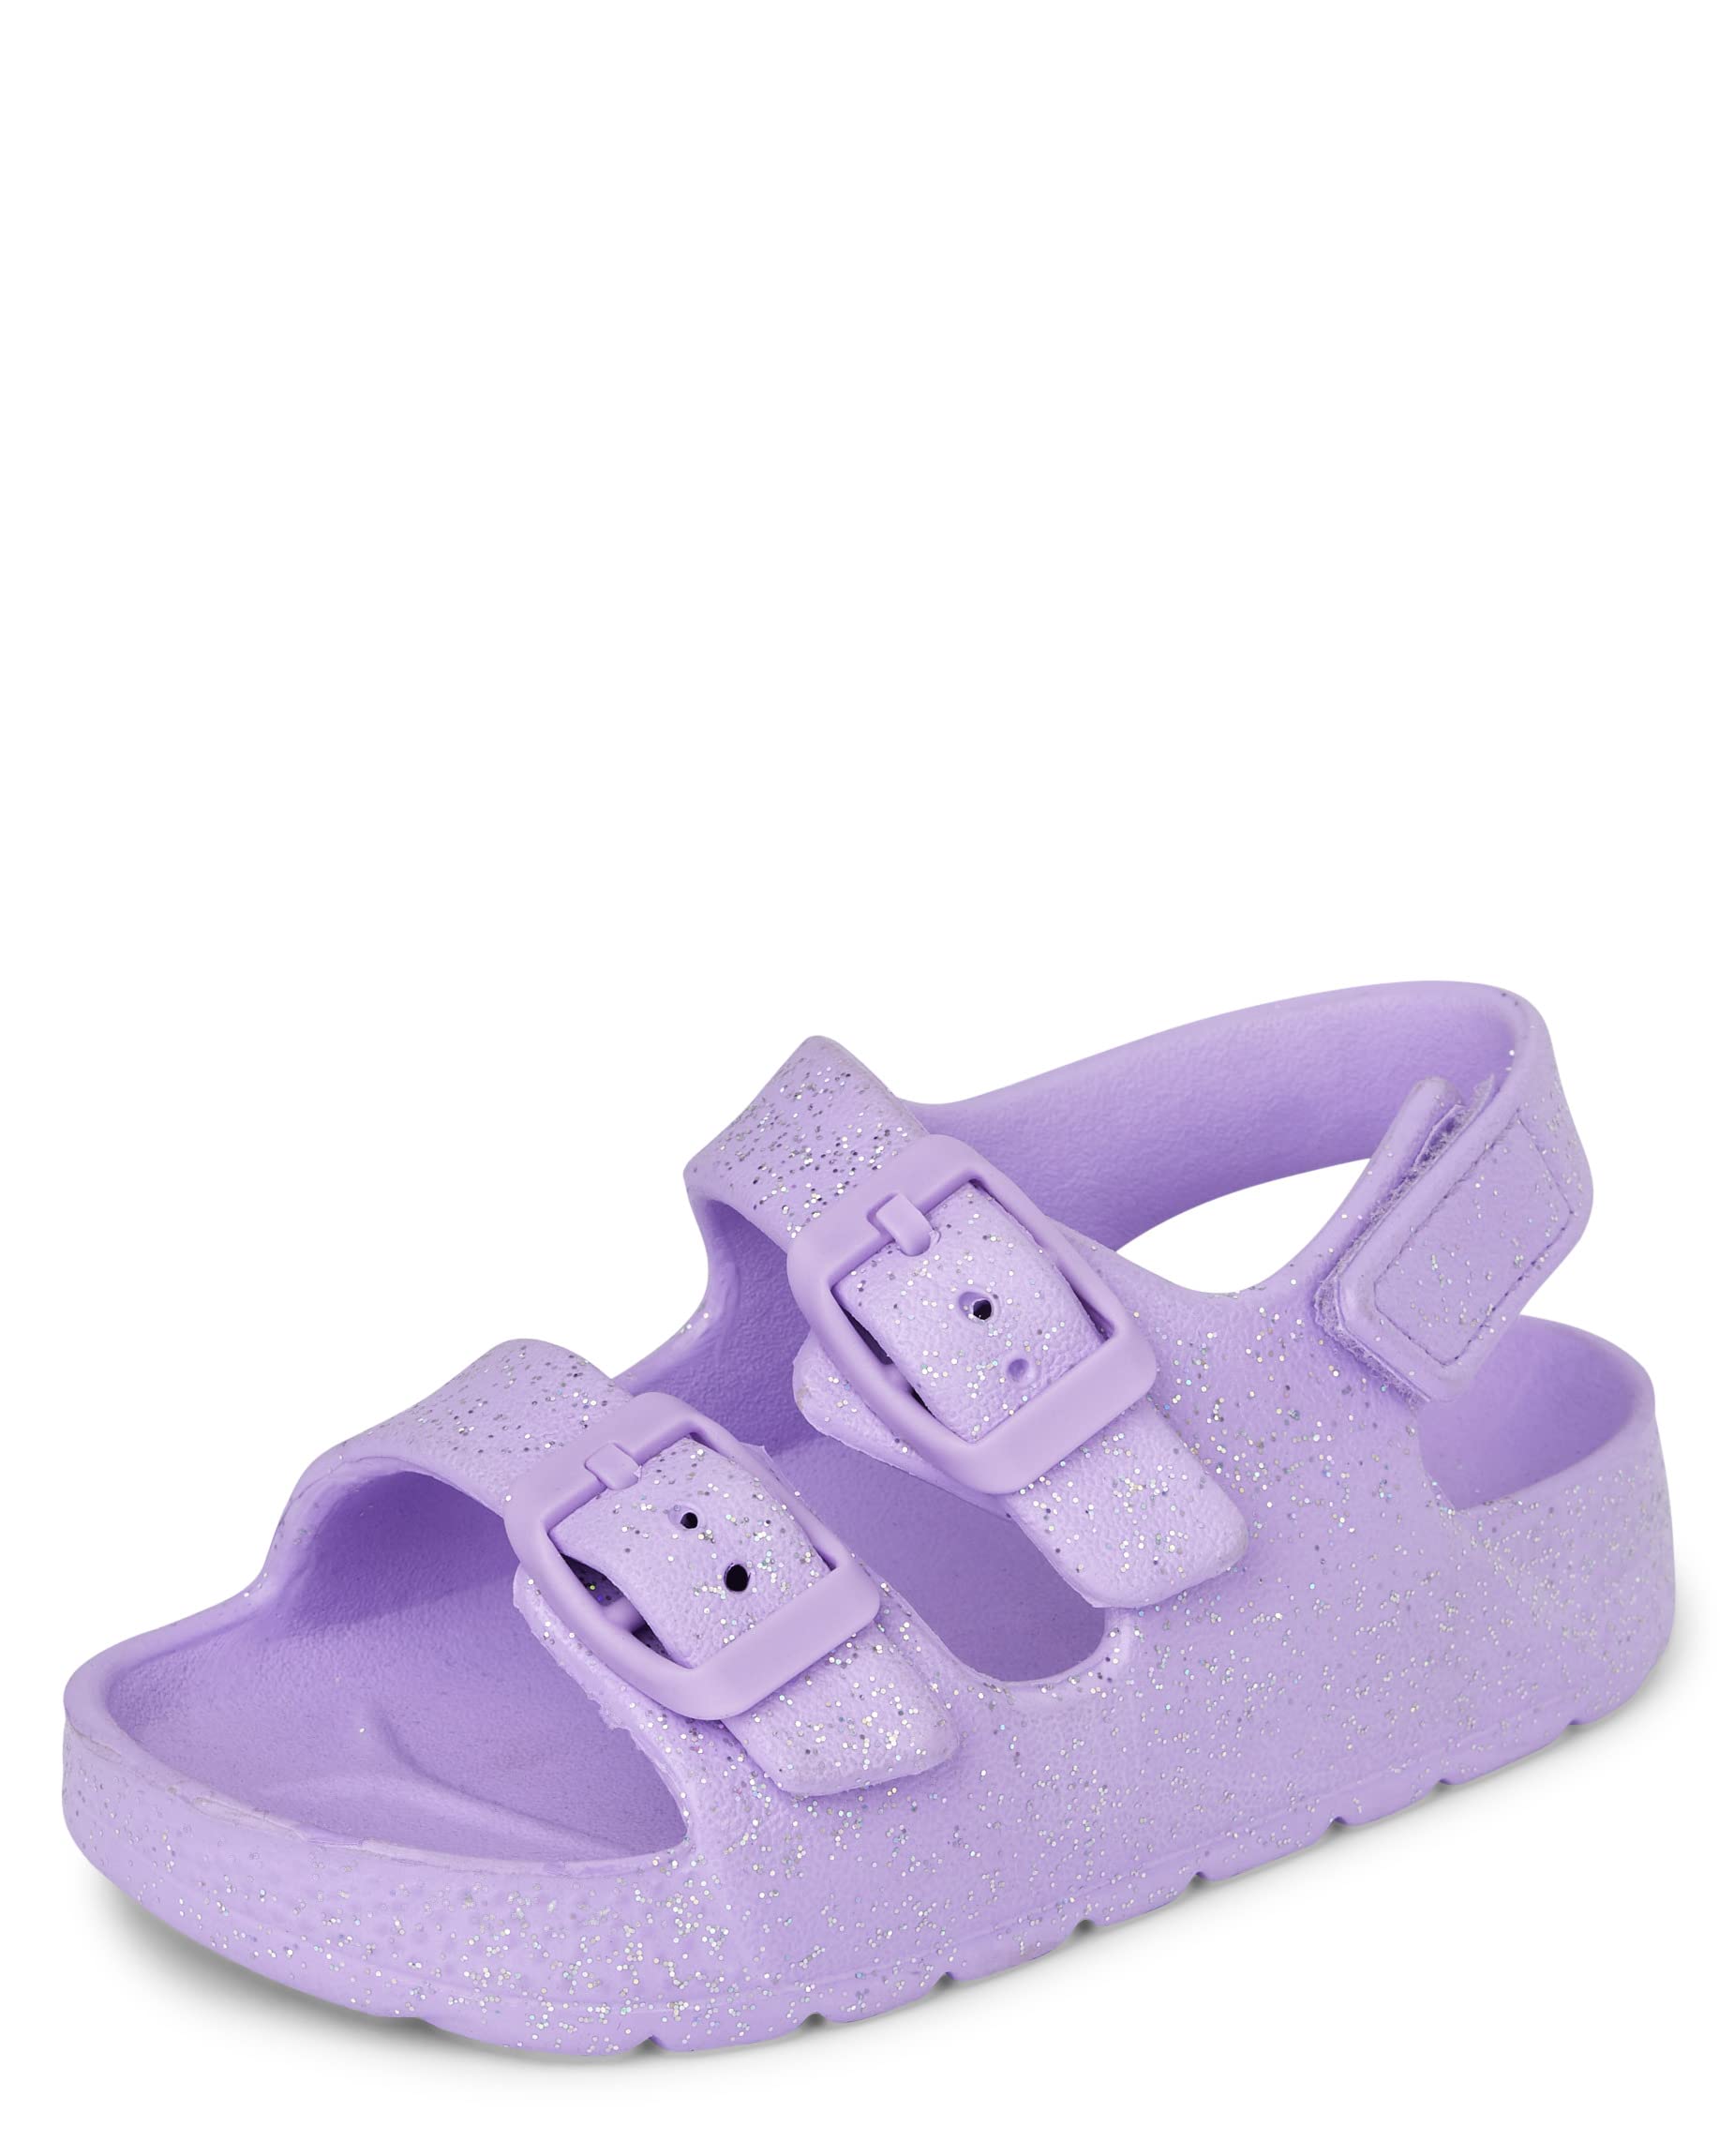 The Children's Place Unisex-Child and Toddler Girls Buckle Slides Sandal